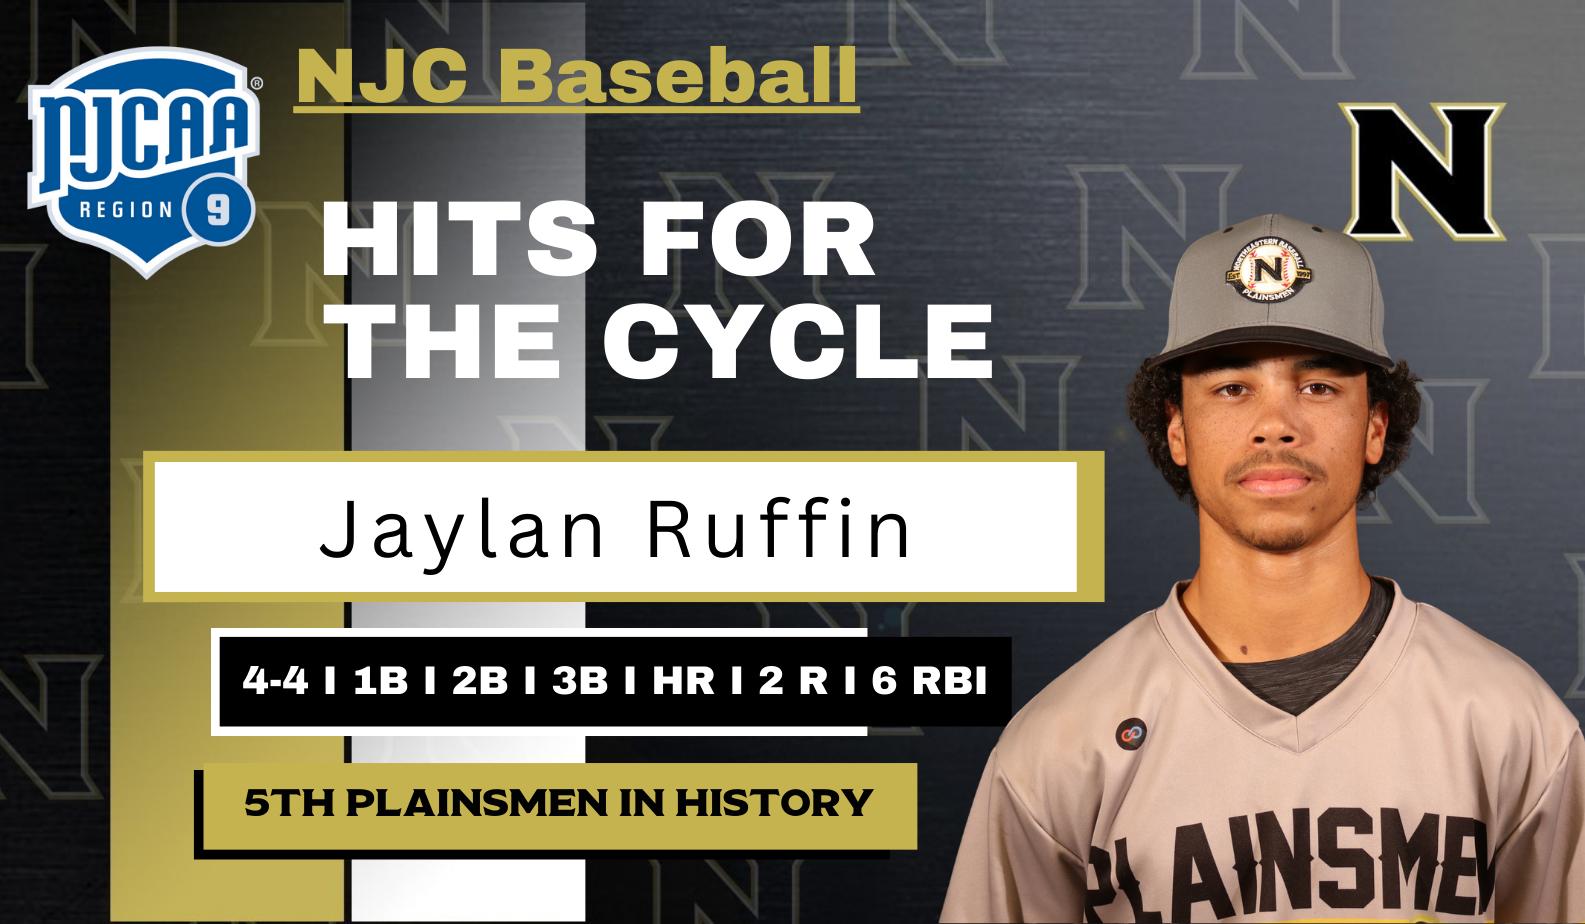 Ruffin Hits for the Cycle - 5th Plainsmen in History